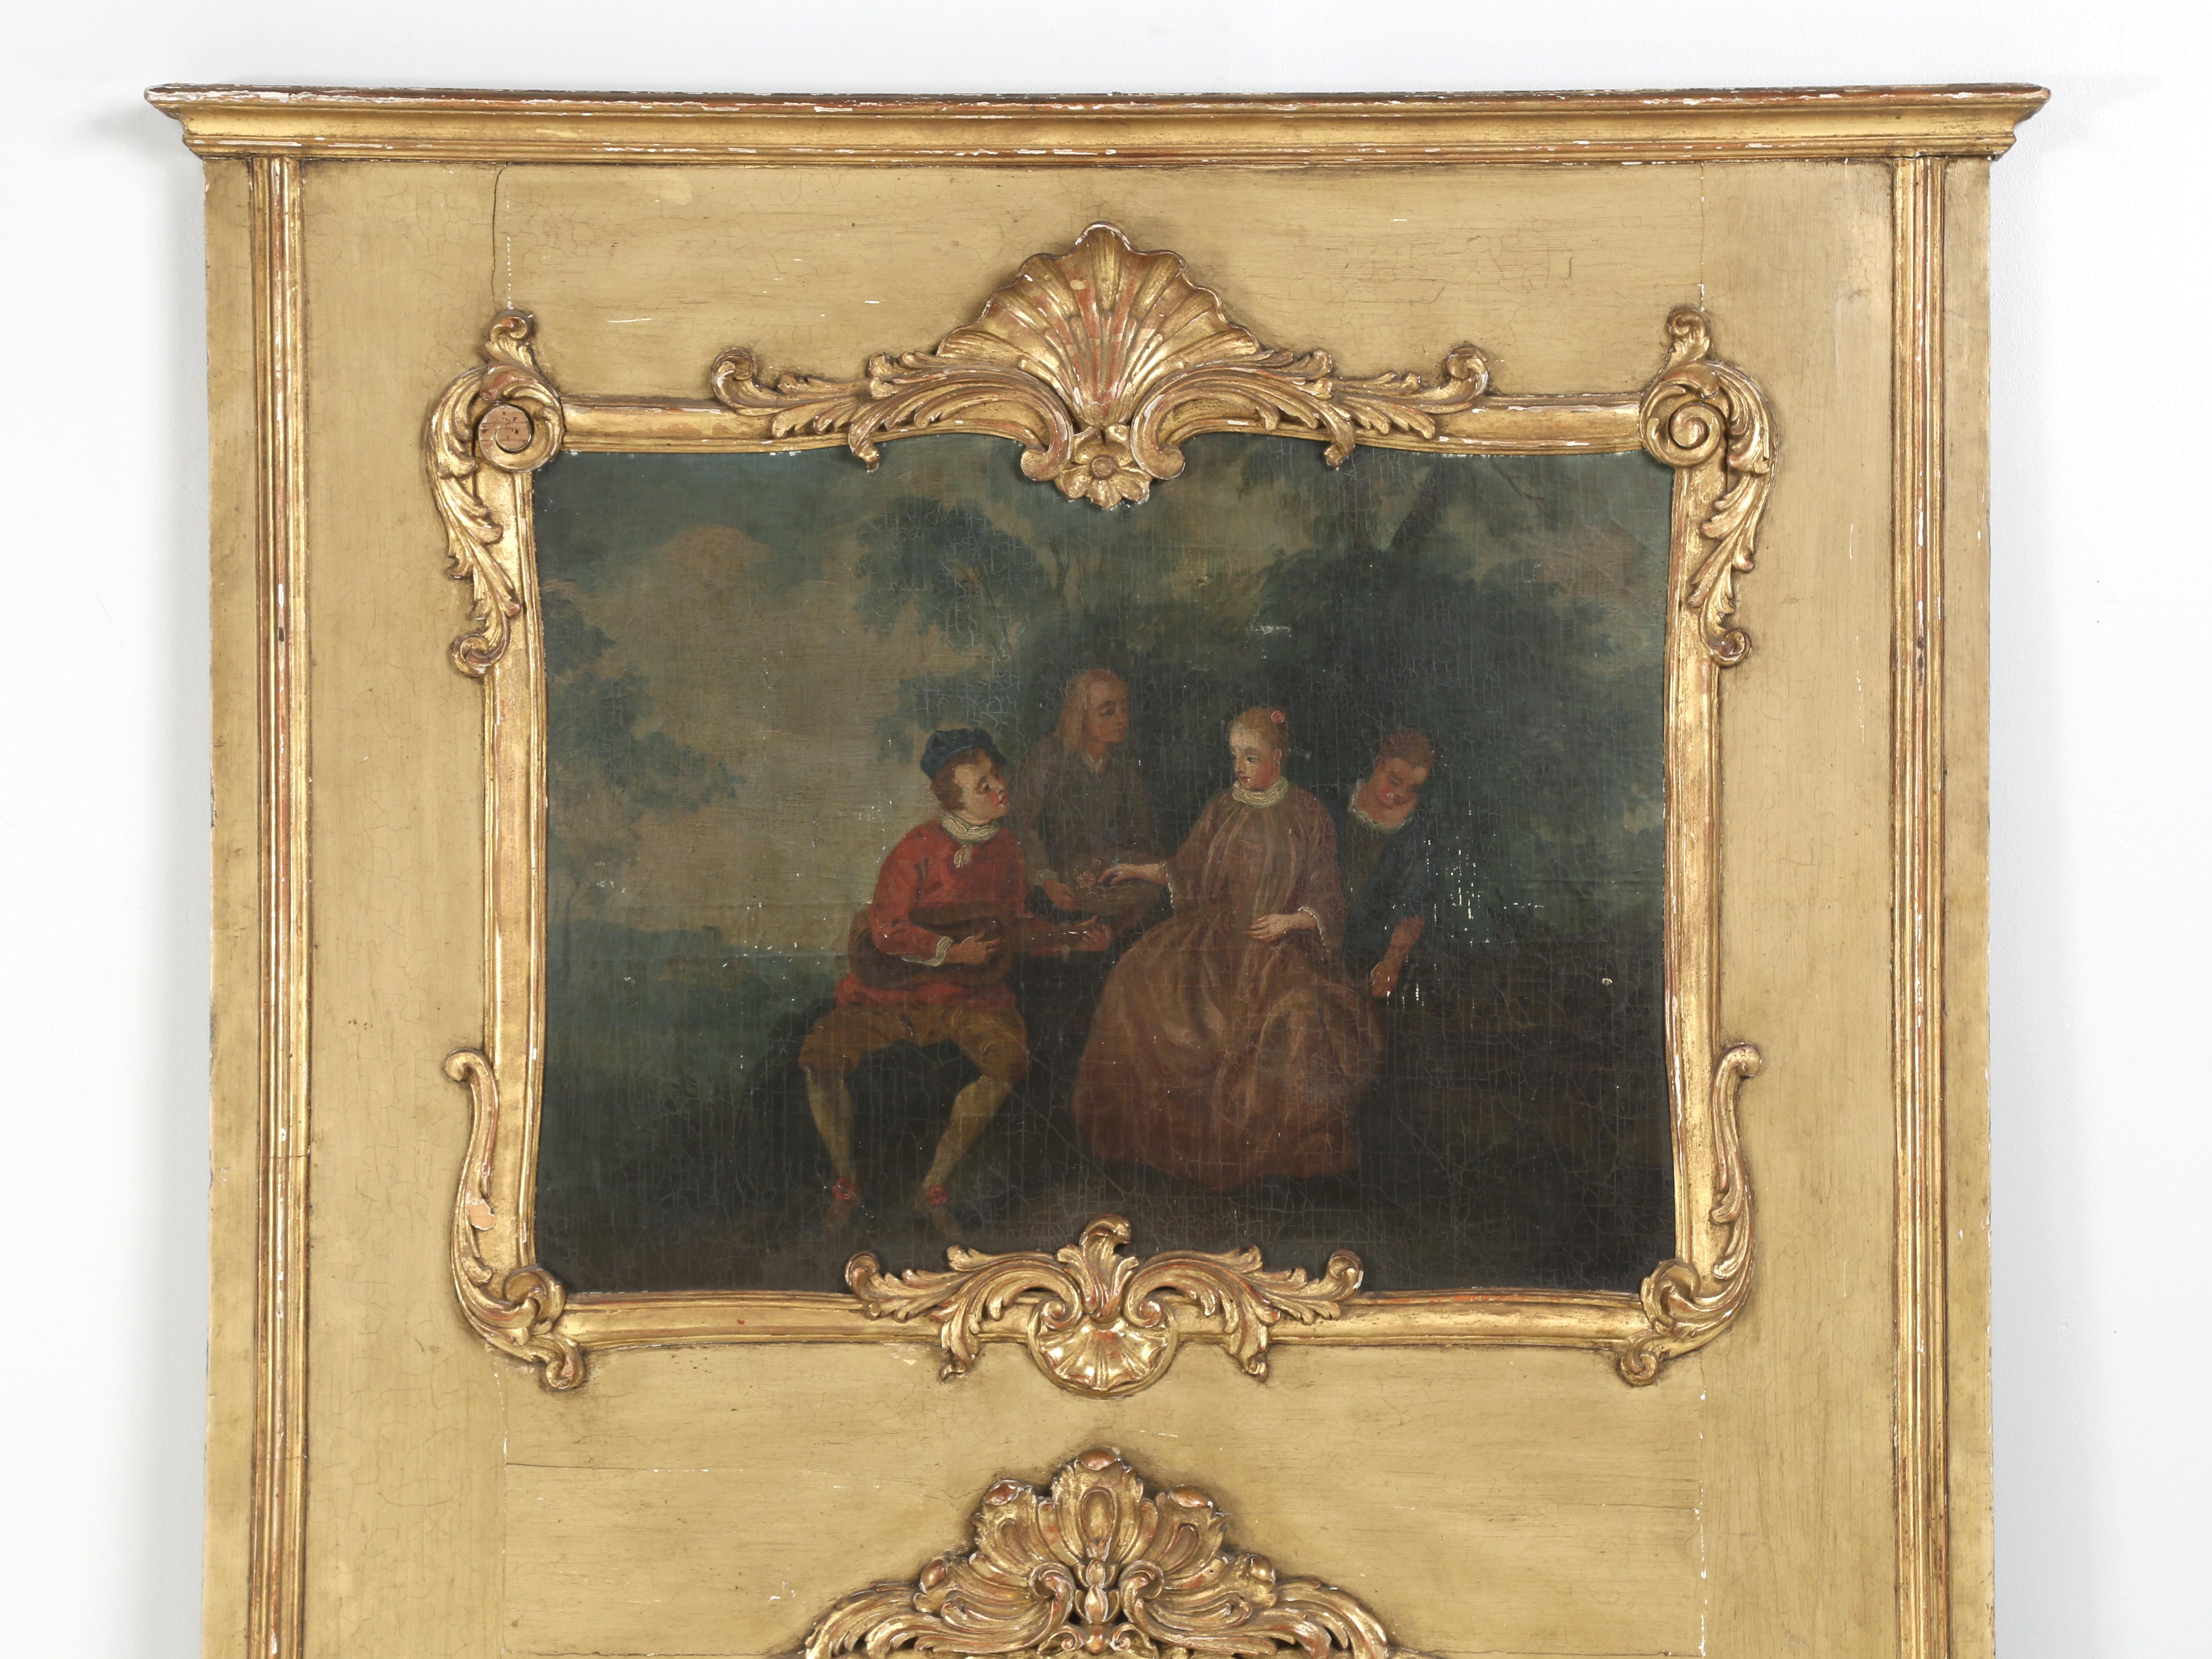 Gilt Antique French Trumeau Mirror Completely All Original and Unrestored c1770-1790 For Sale